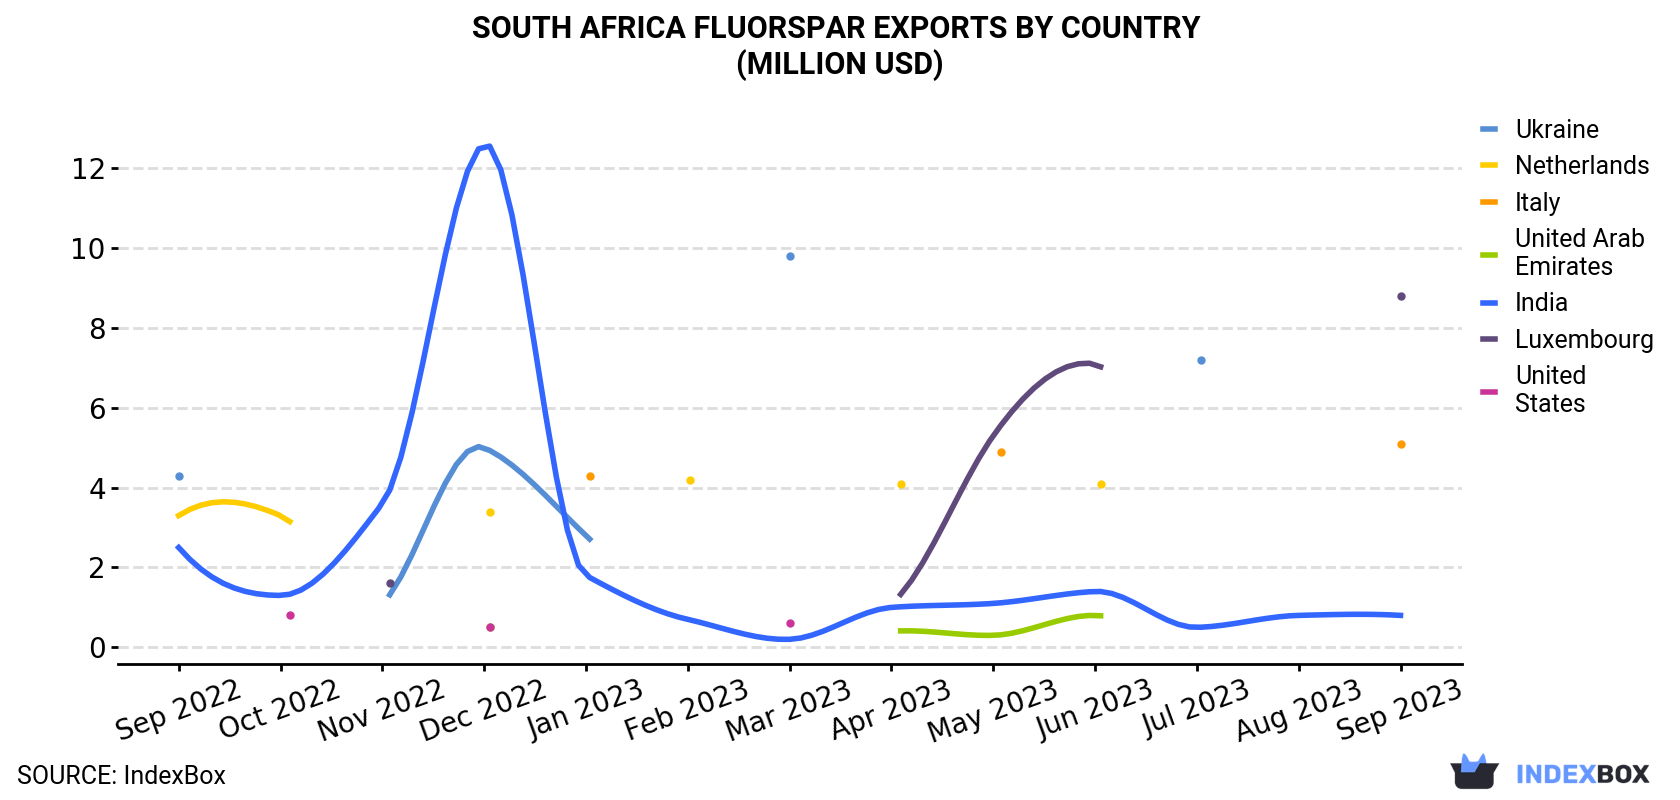 South Africa Fluorspar Exports By Country (Million USD)